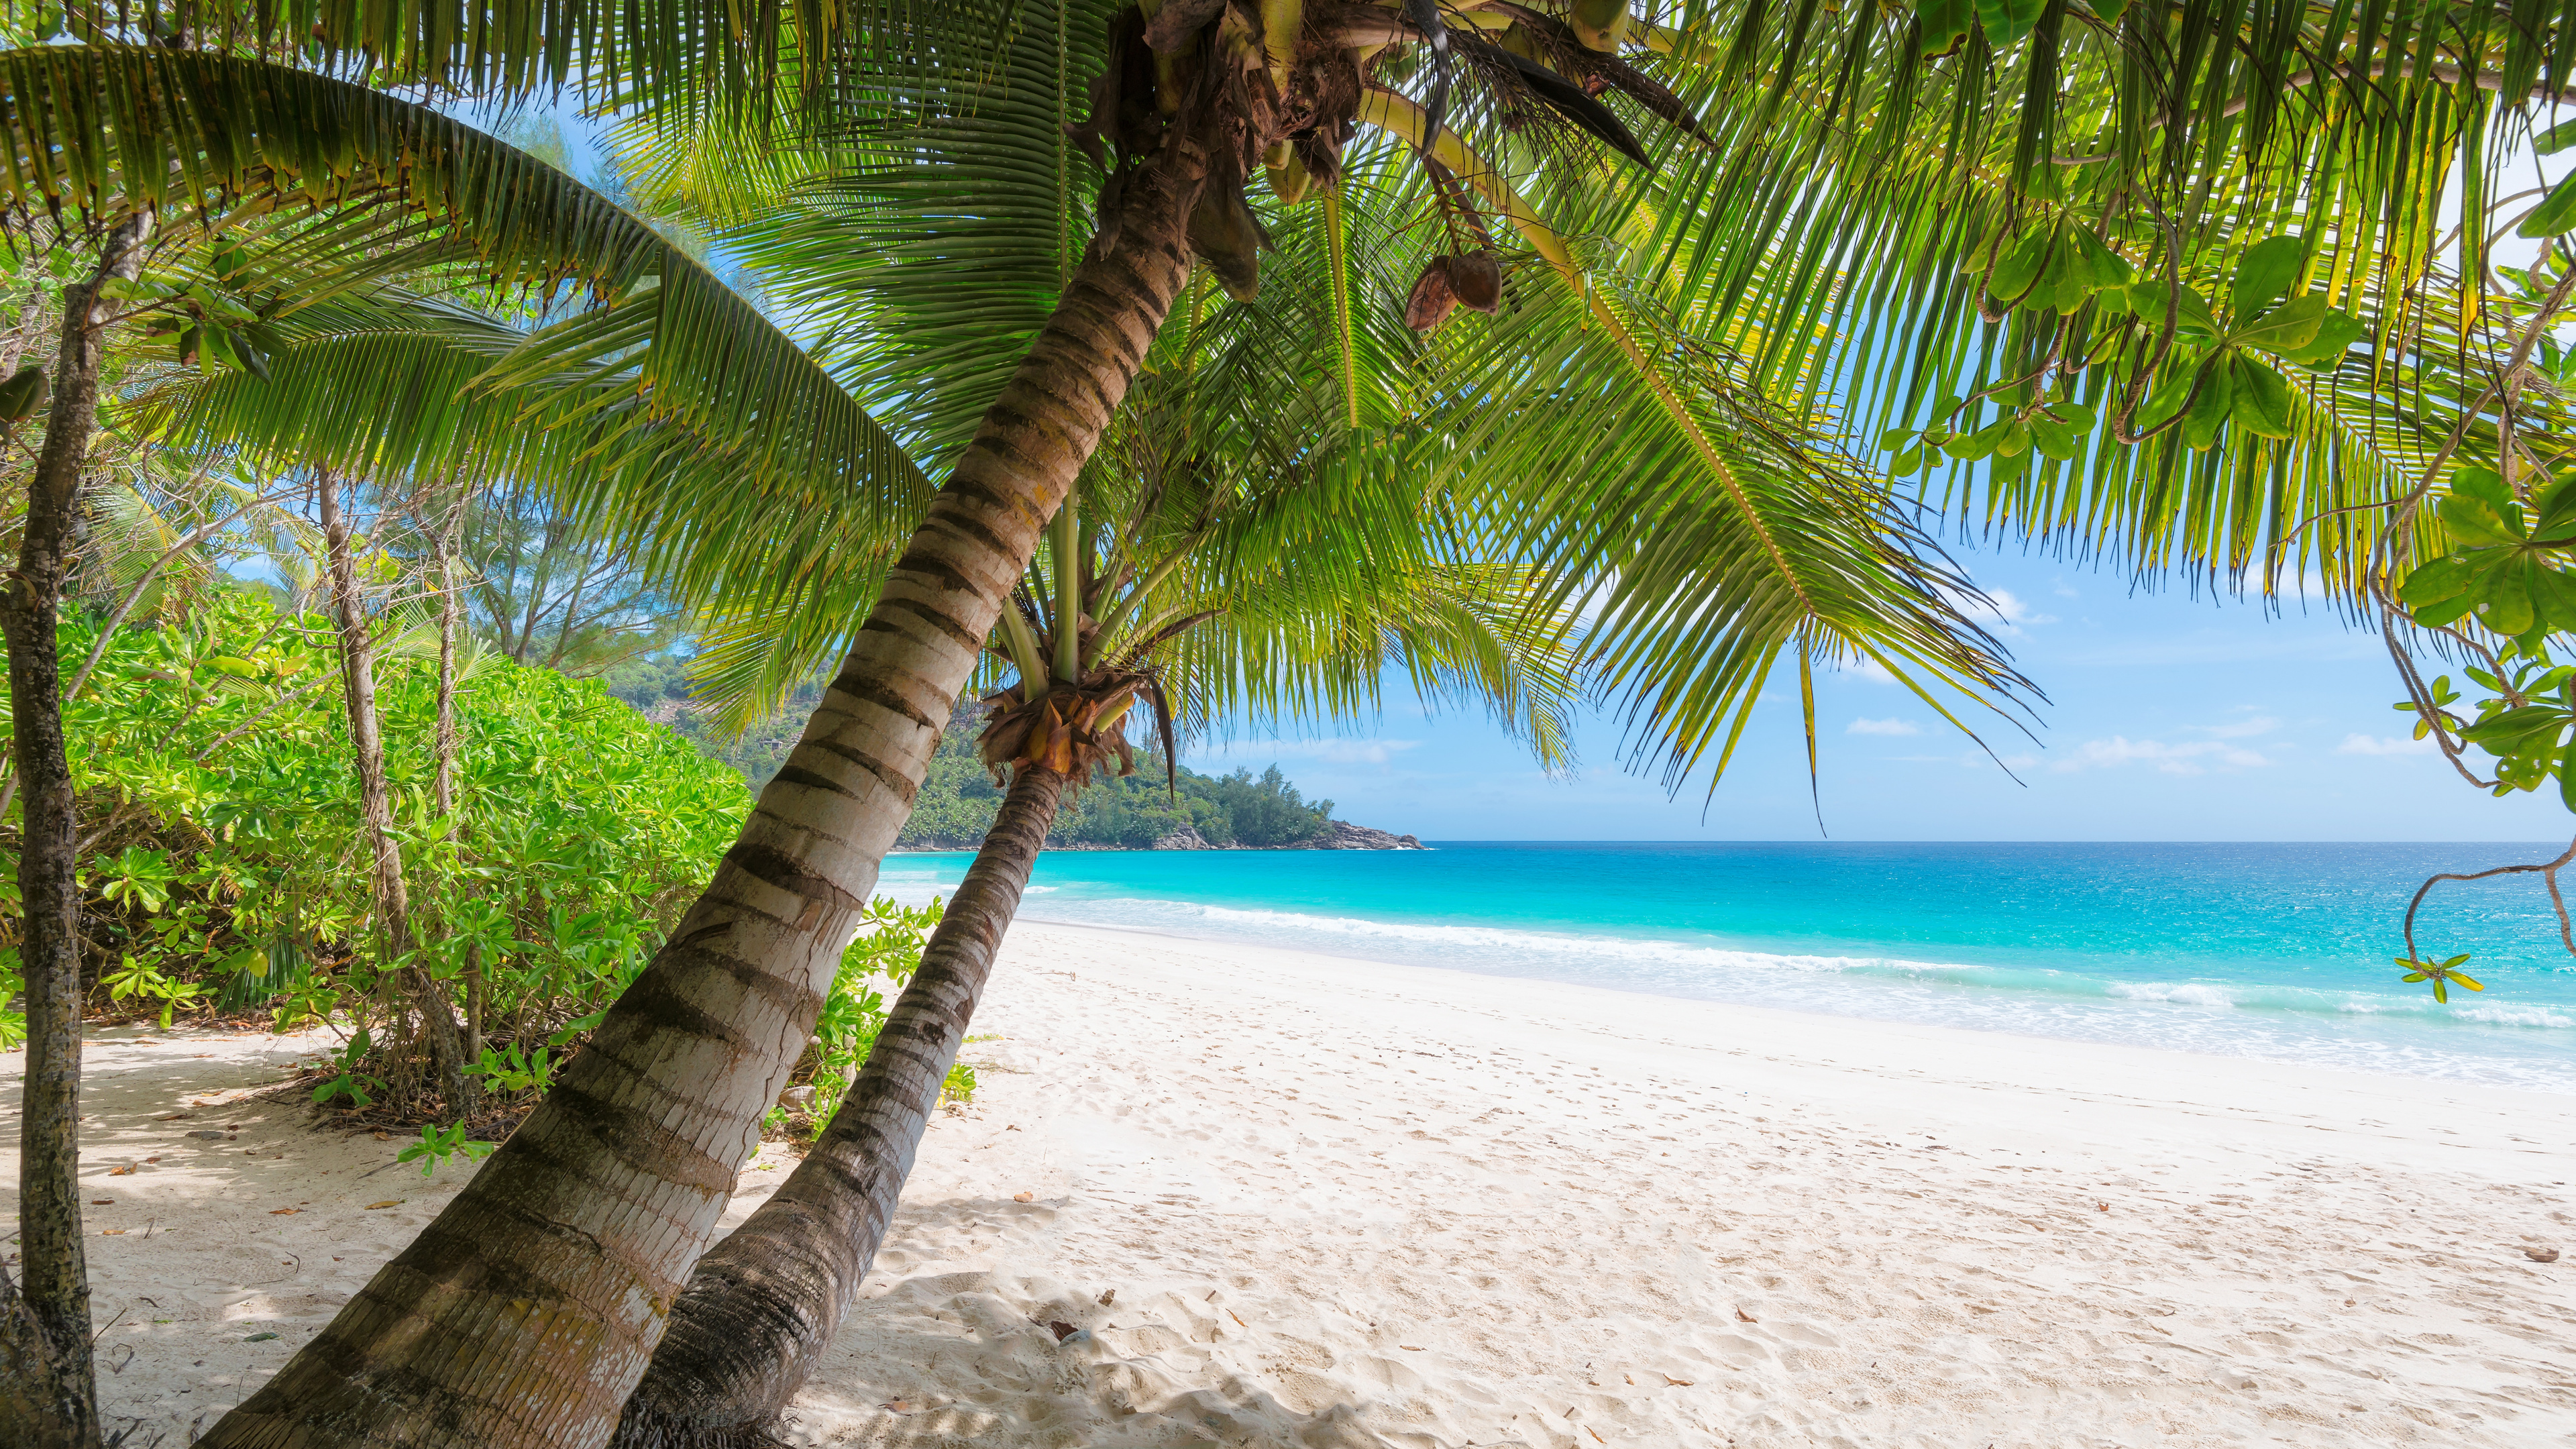 Coconut Tree on White Sand Beach During Daytime. Wallpaper in 3840x2160 Resolution